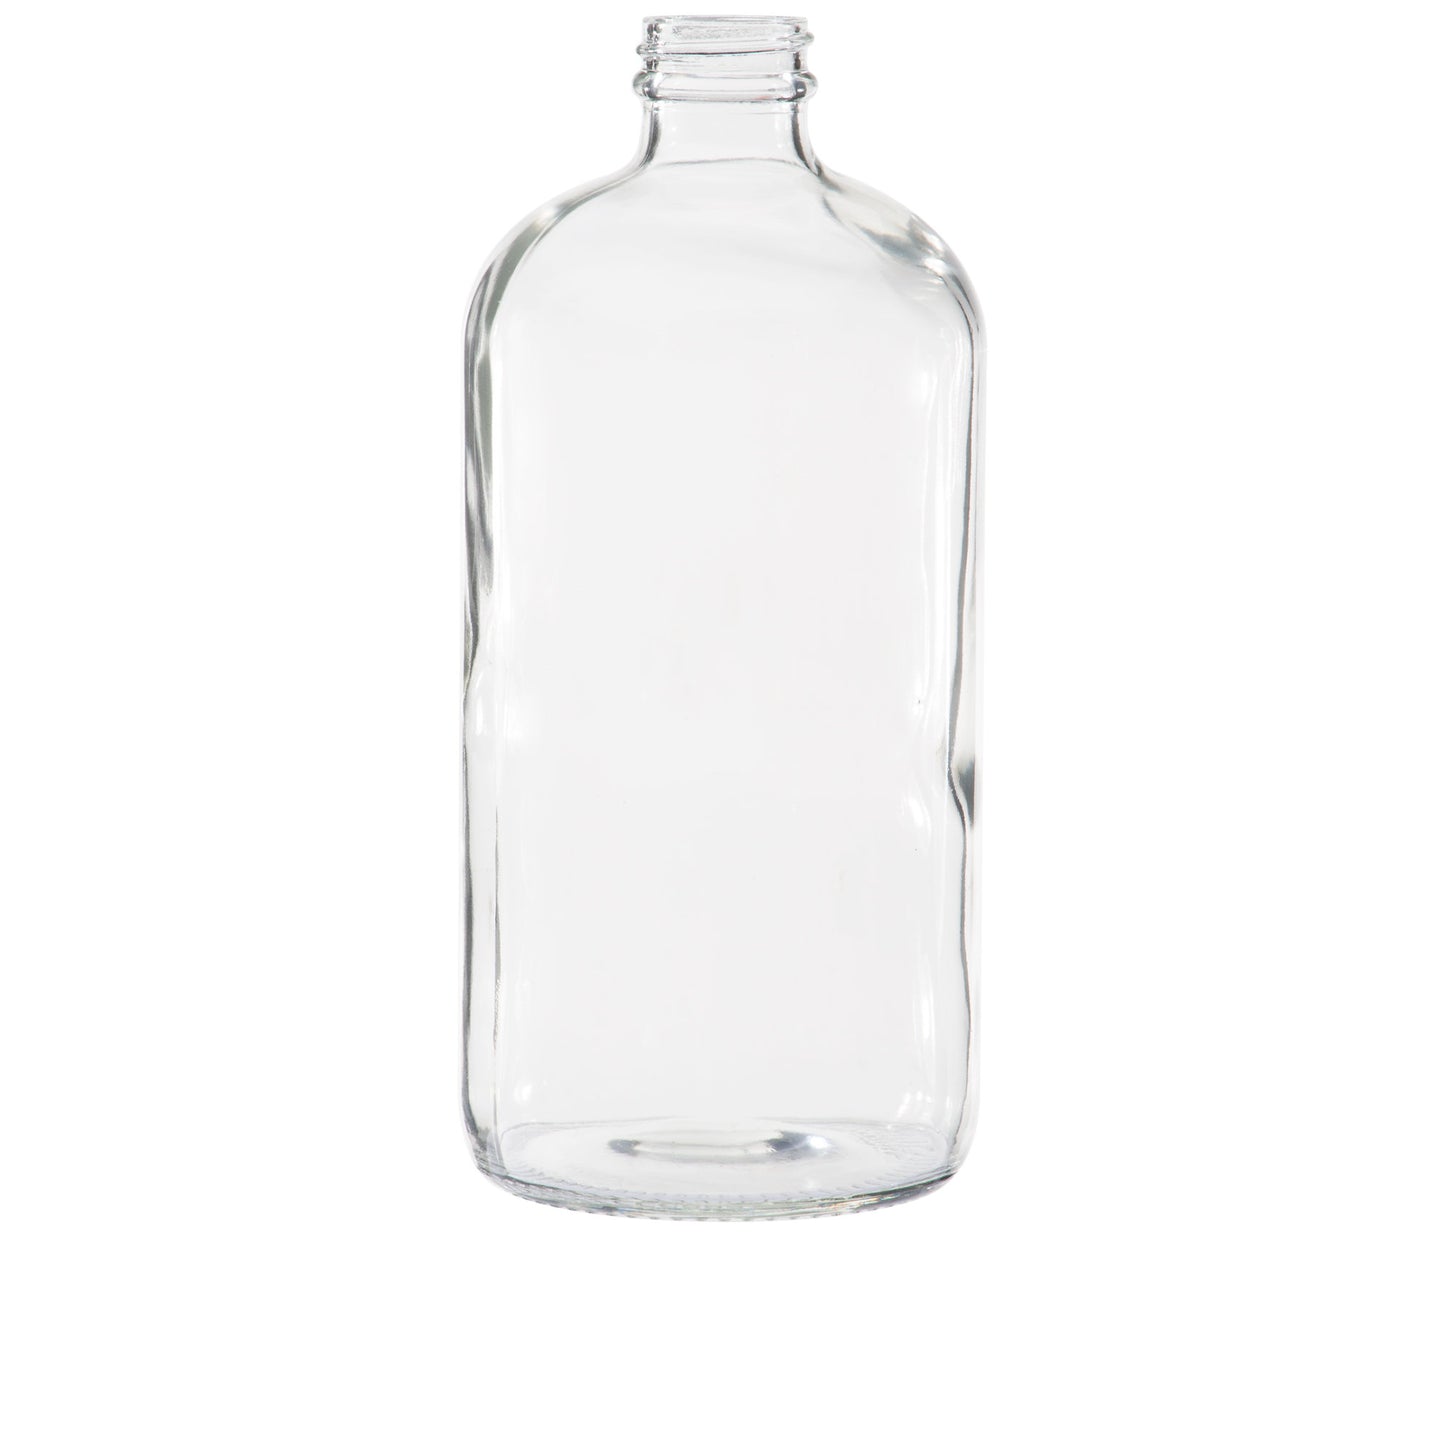 32 oz (960 ml) Clear Glass Boston Round 28-400 Bottle with Cap